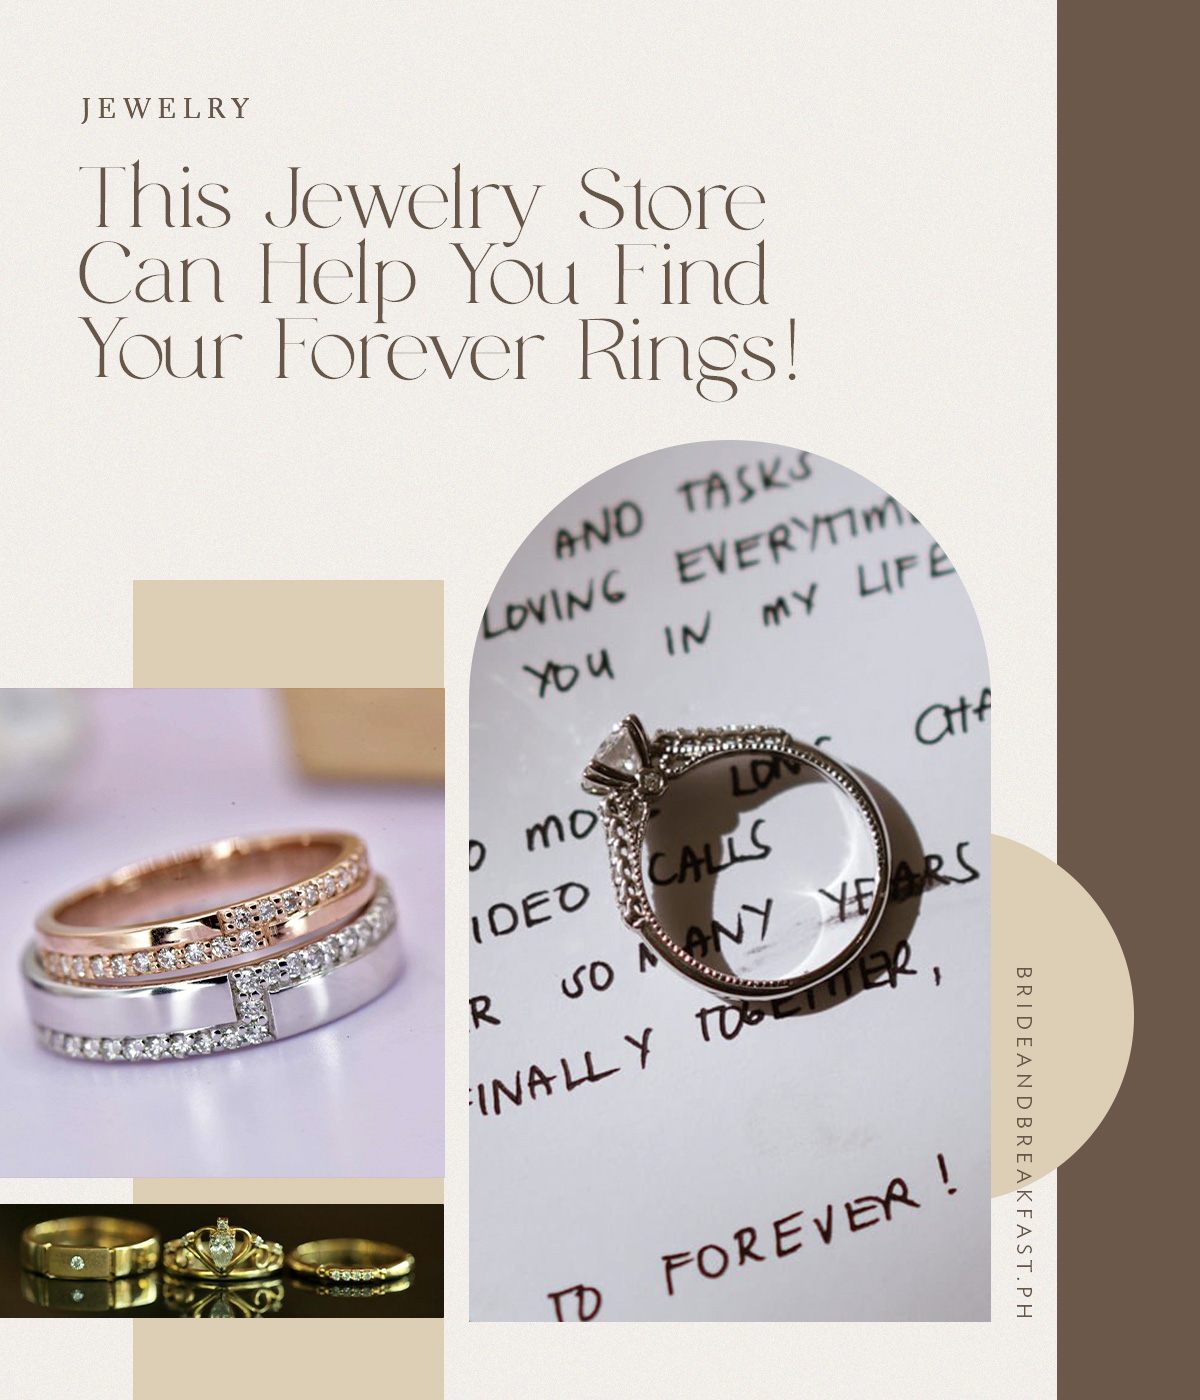 This Jewelry Store Can Help You Find Your Forever Rings!